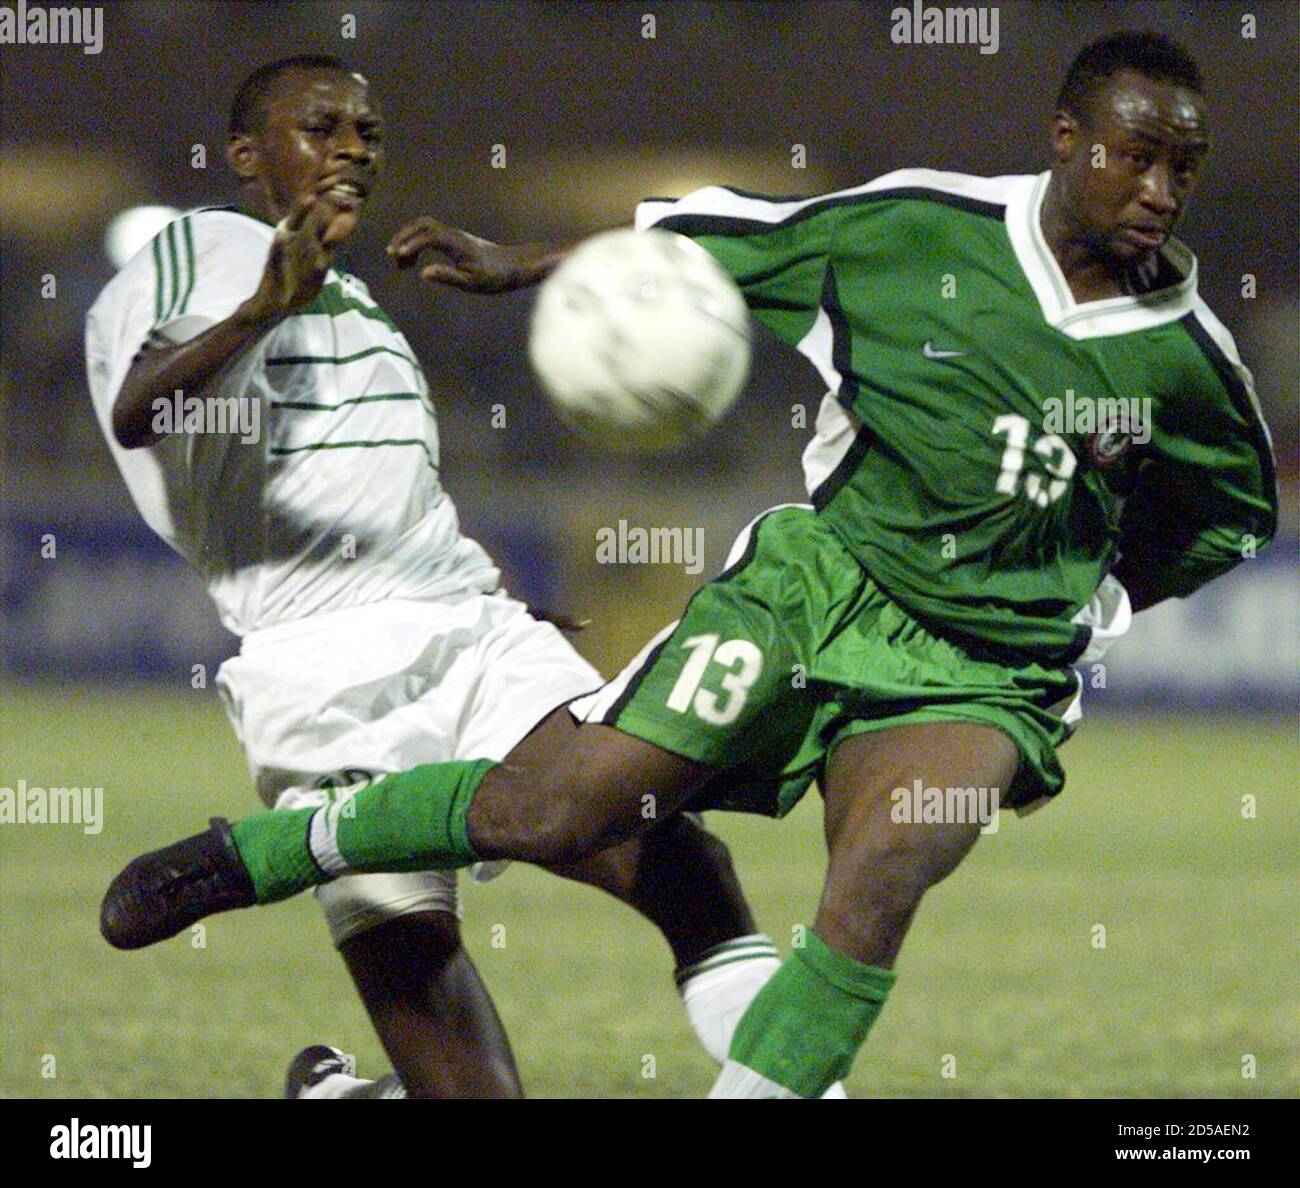 Nigerian Player Tijani Babangida R Fights For The Ball With Ousmane